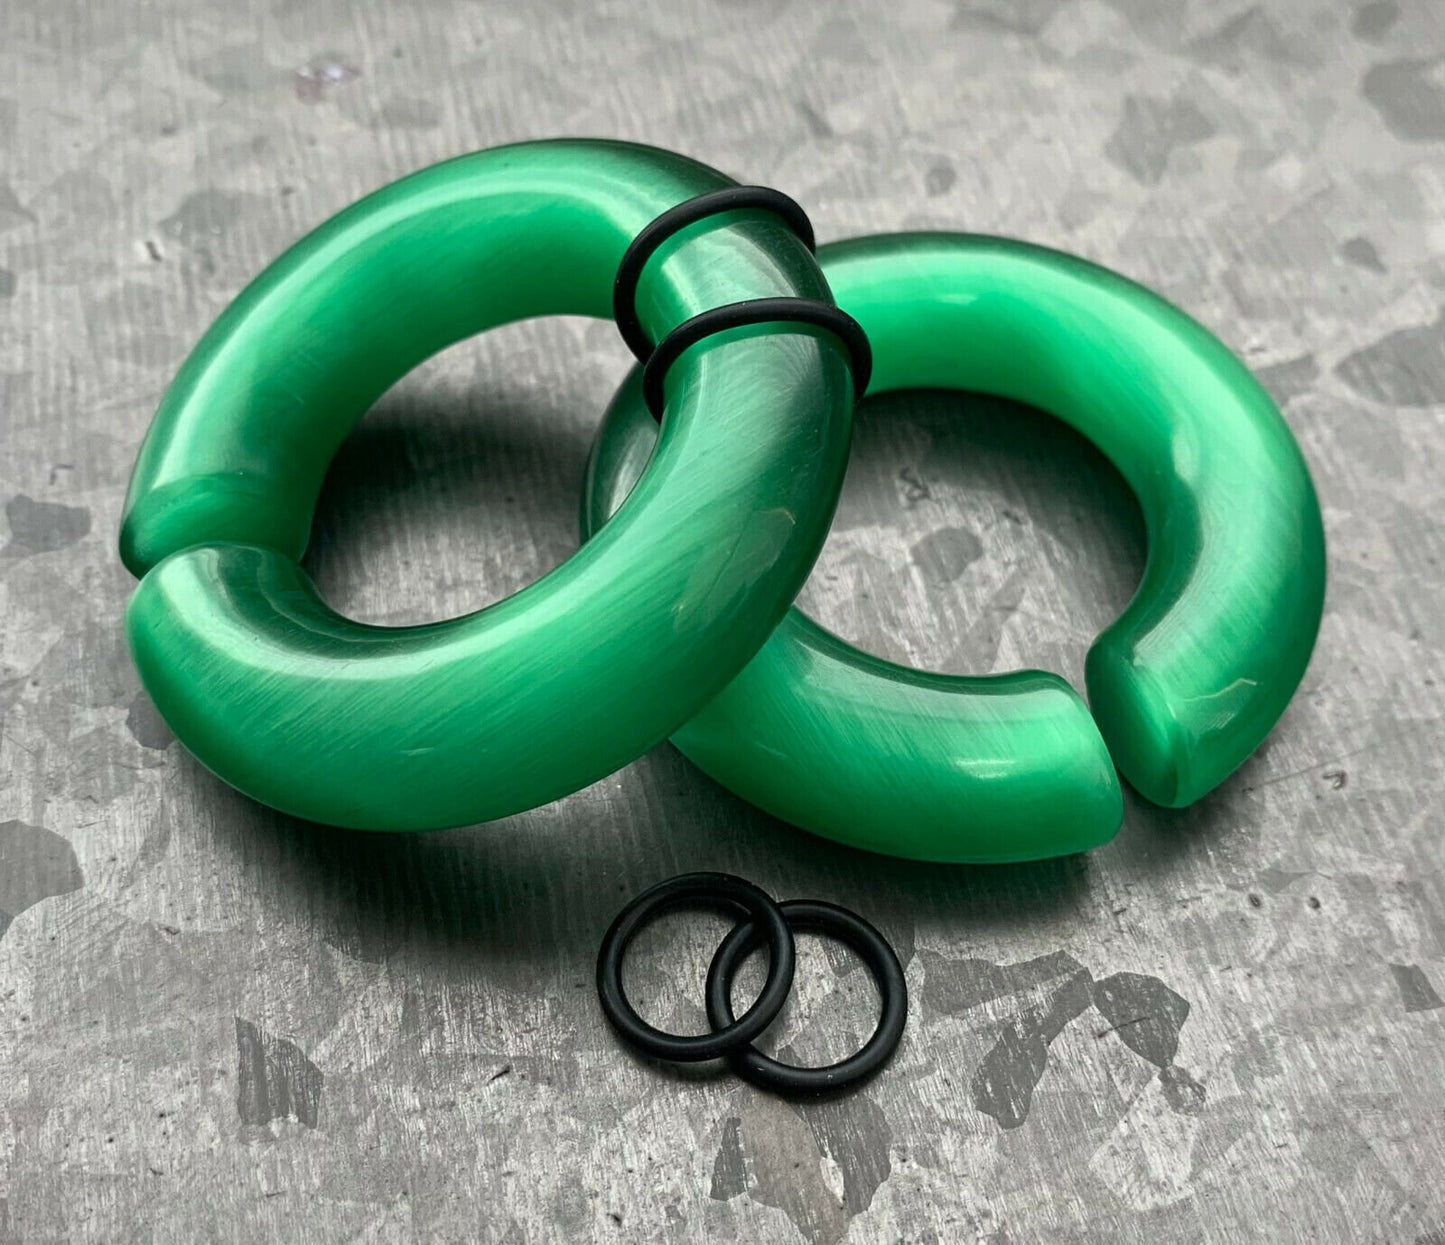 PAIR of Unique Deep Green Cat Eye Large Stone/Glass Hoops Ear Weight Hanging Plugs & O-rings - Gauges 4g (5mm) up to 5/8" (16mm) available!